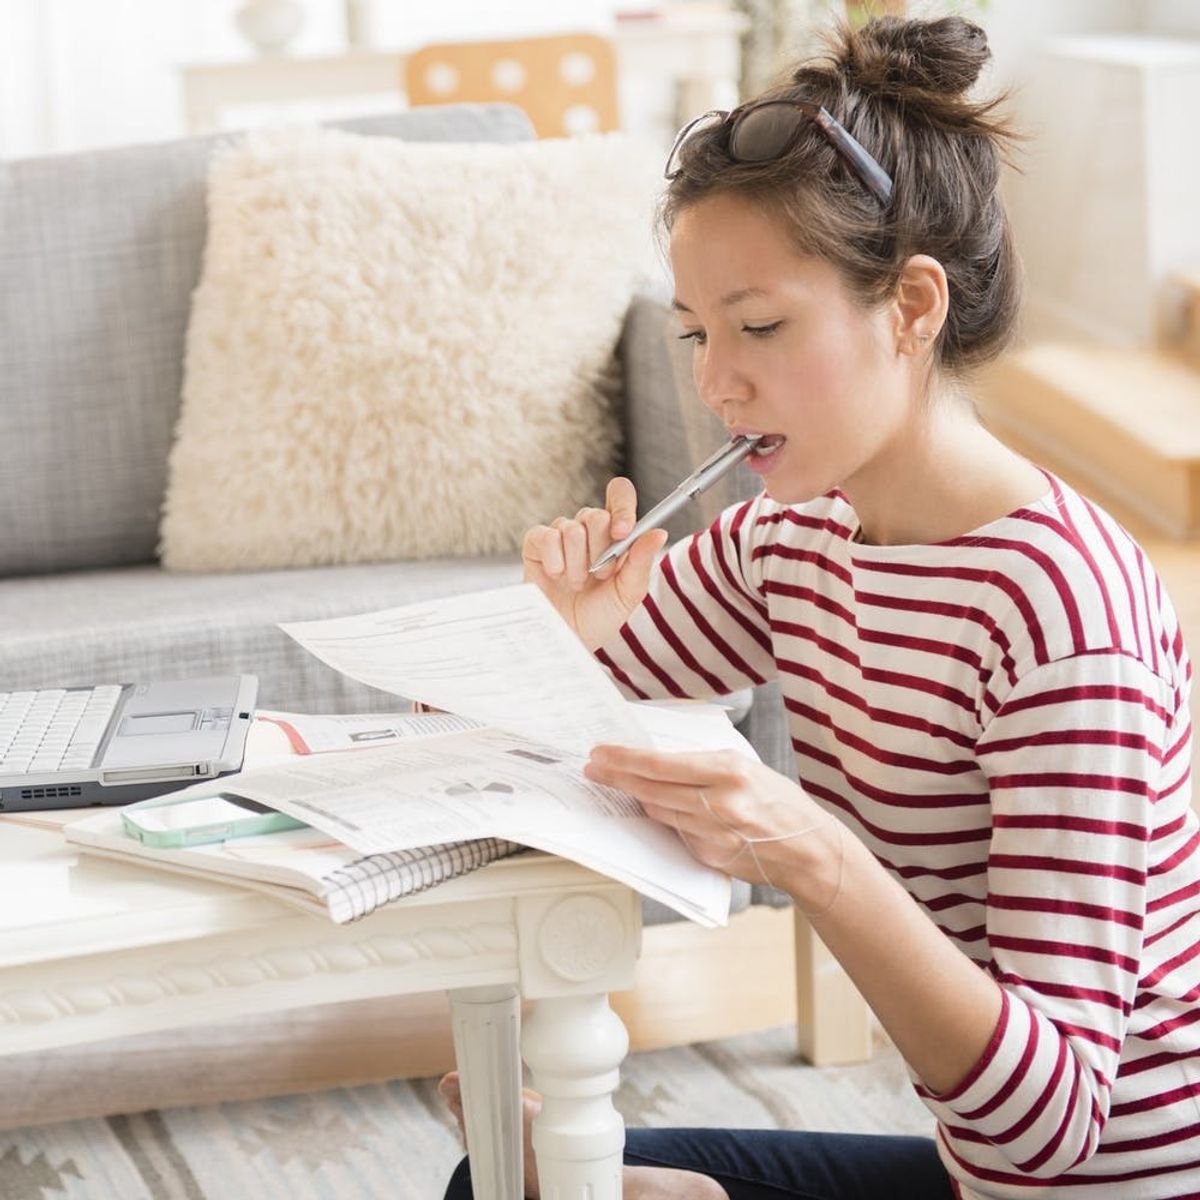 I Kept a Spending Diary for a Week and This Is What I Learned